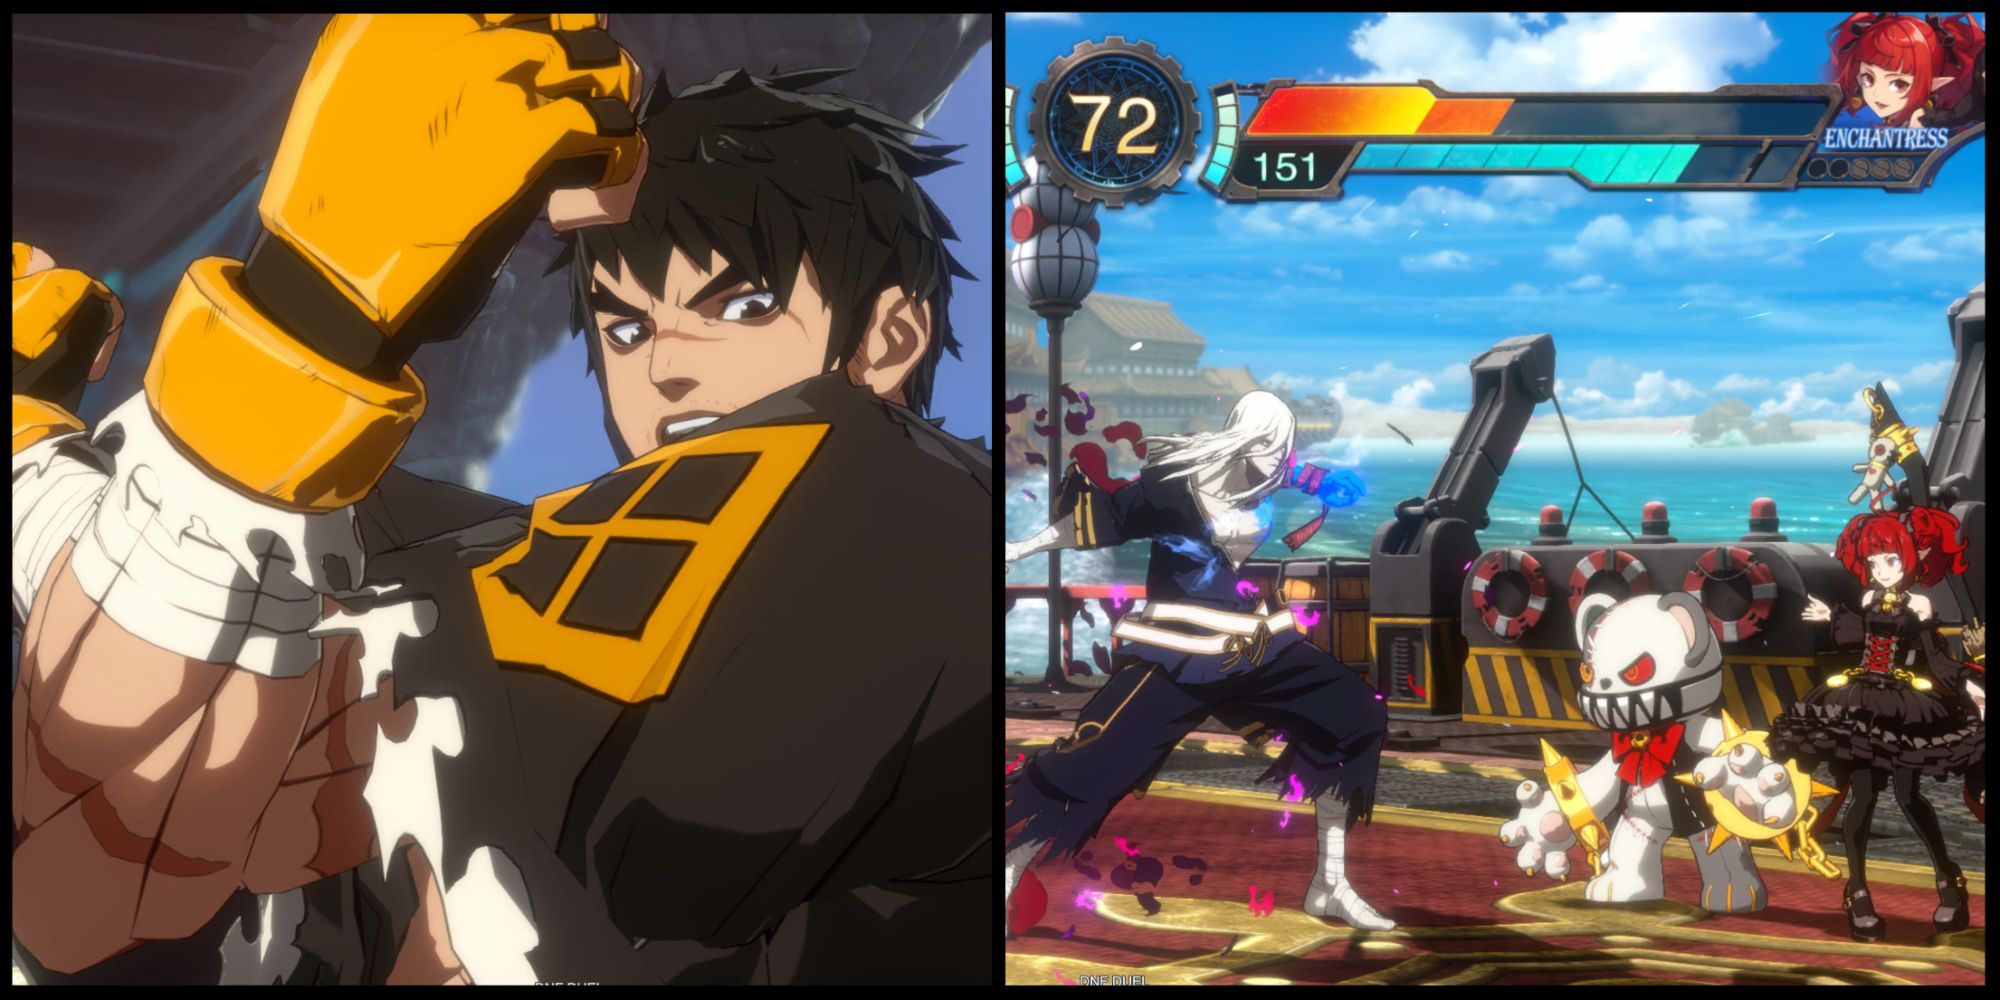 A split image of Grappler relaxing his muscles on the left and Ghostblade fighting Enchantress on the right.